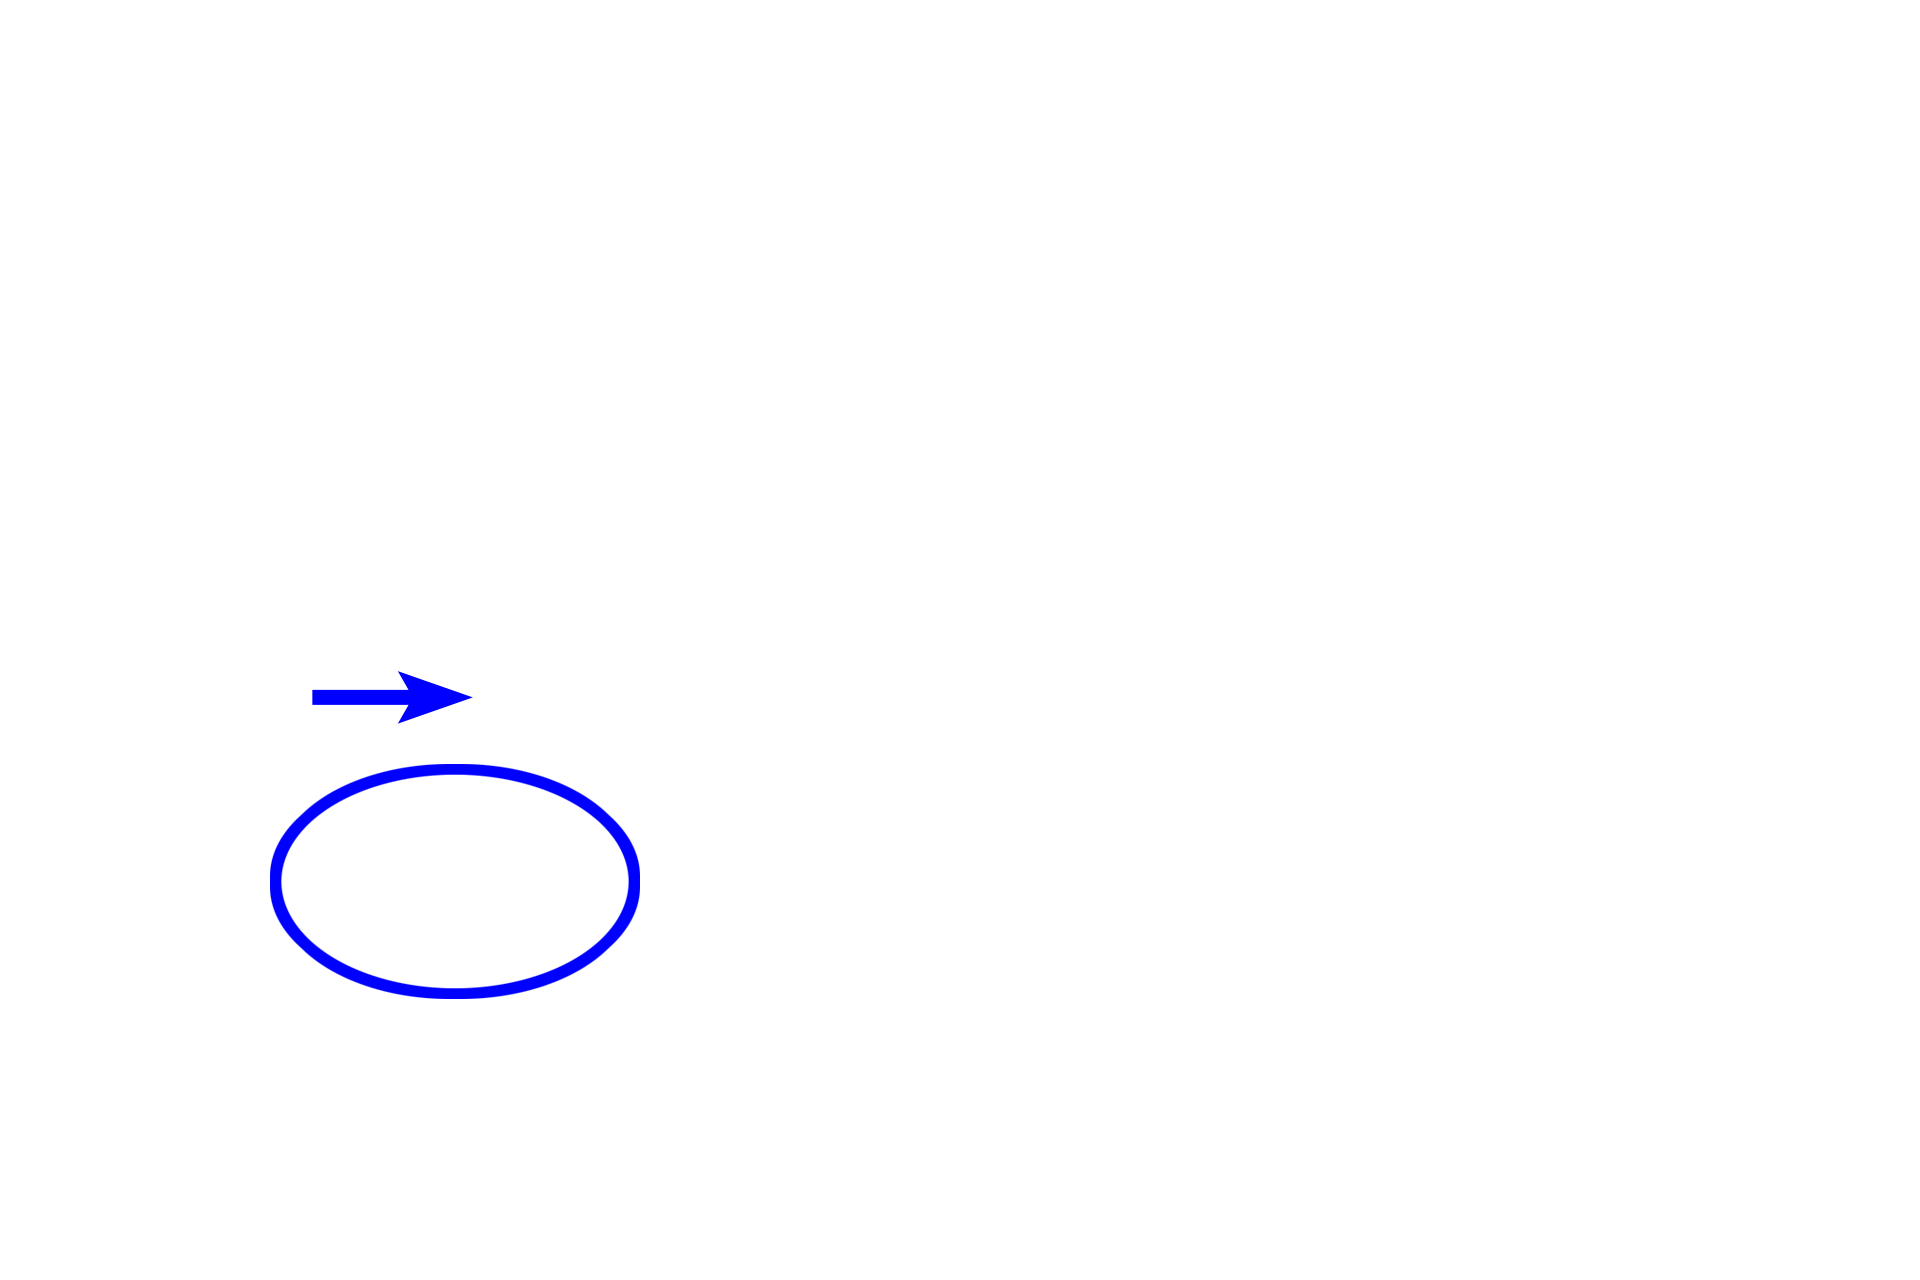  - Simple coiled tubular<br>gland > <p>A simple coiled tubular gland has a tubular secretory unit (blue oval) that coils on itself like a ball of yarn.  Secretory product is conveyed to the surface epithelium by a single duct (blue arrow).  The most common simple coiled tubular gland in the human does not secrete mucus, it is specialized to produce sweat.</p>
